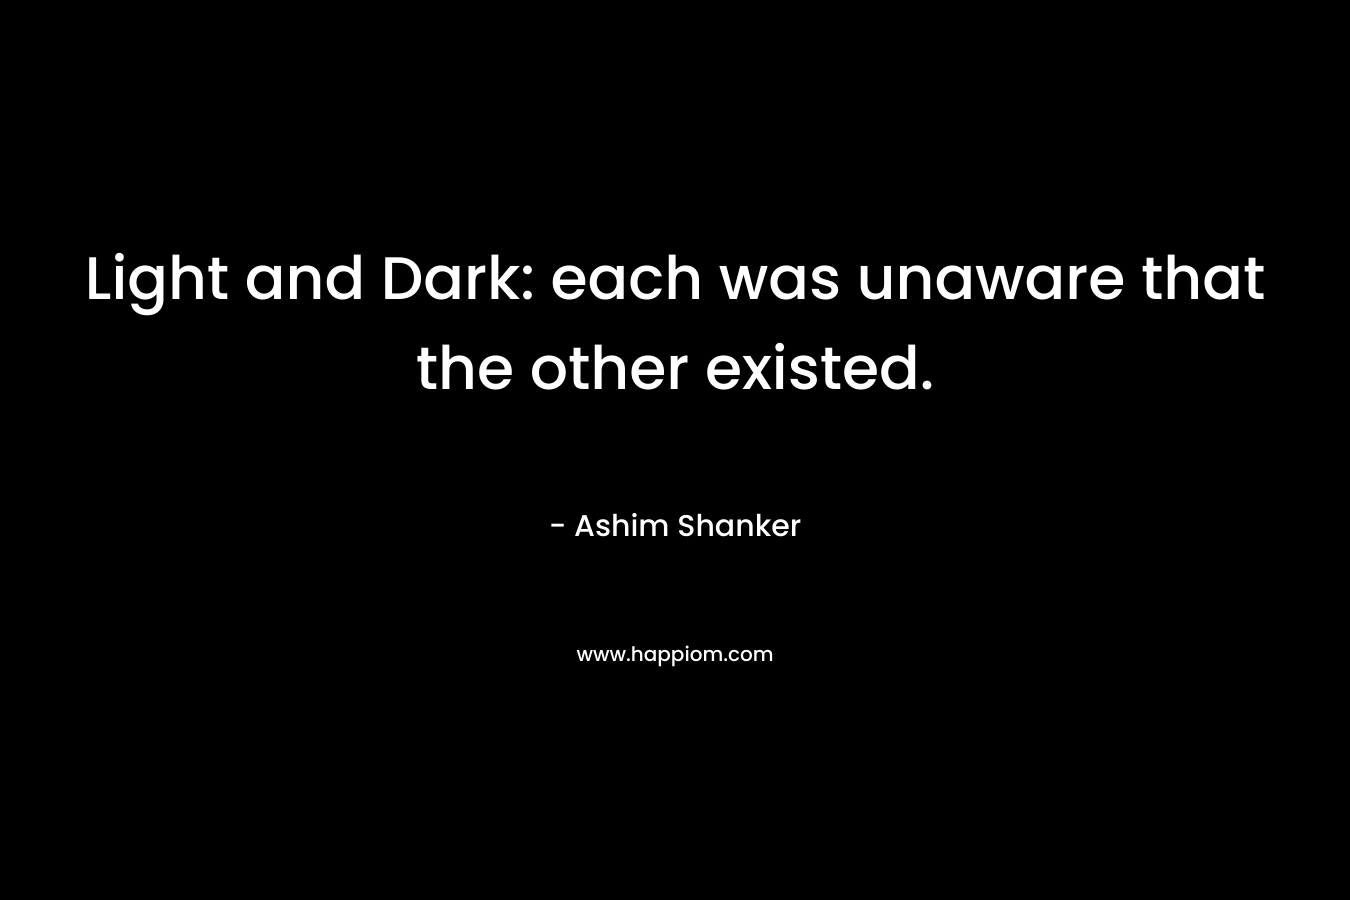 Light and Dark: each was unaware that the other existed.